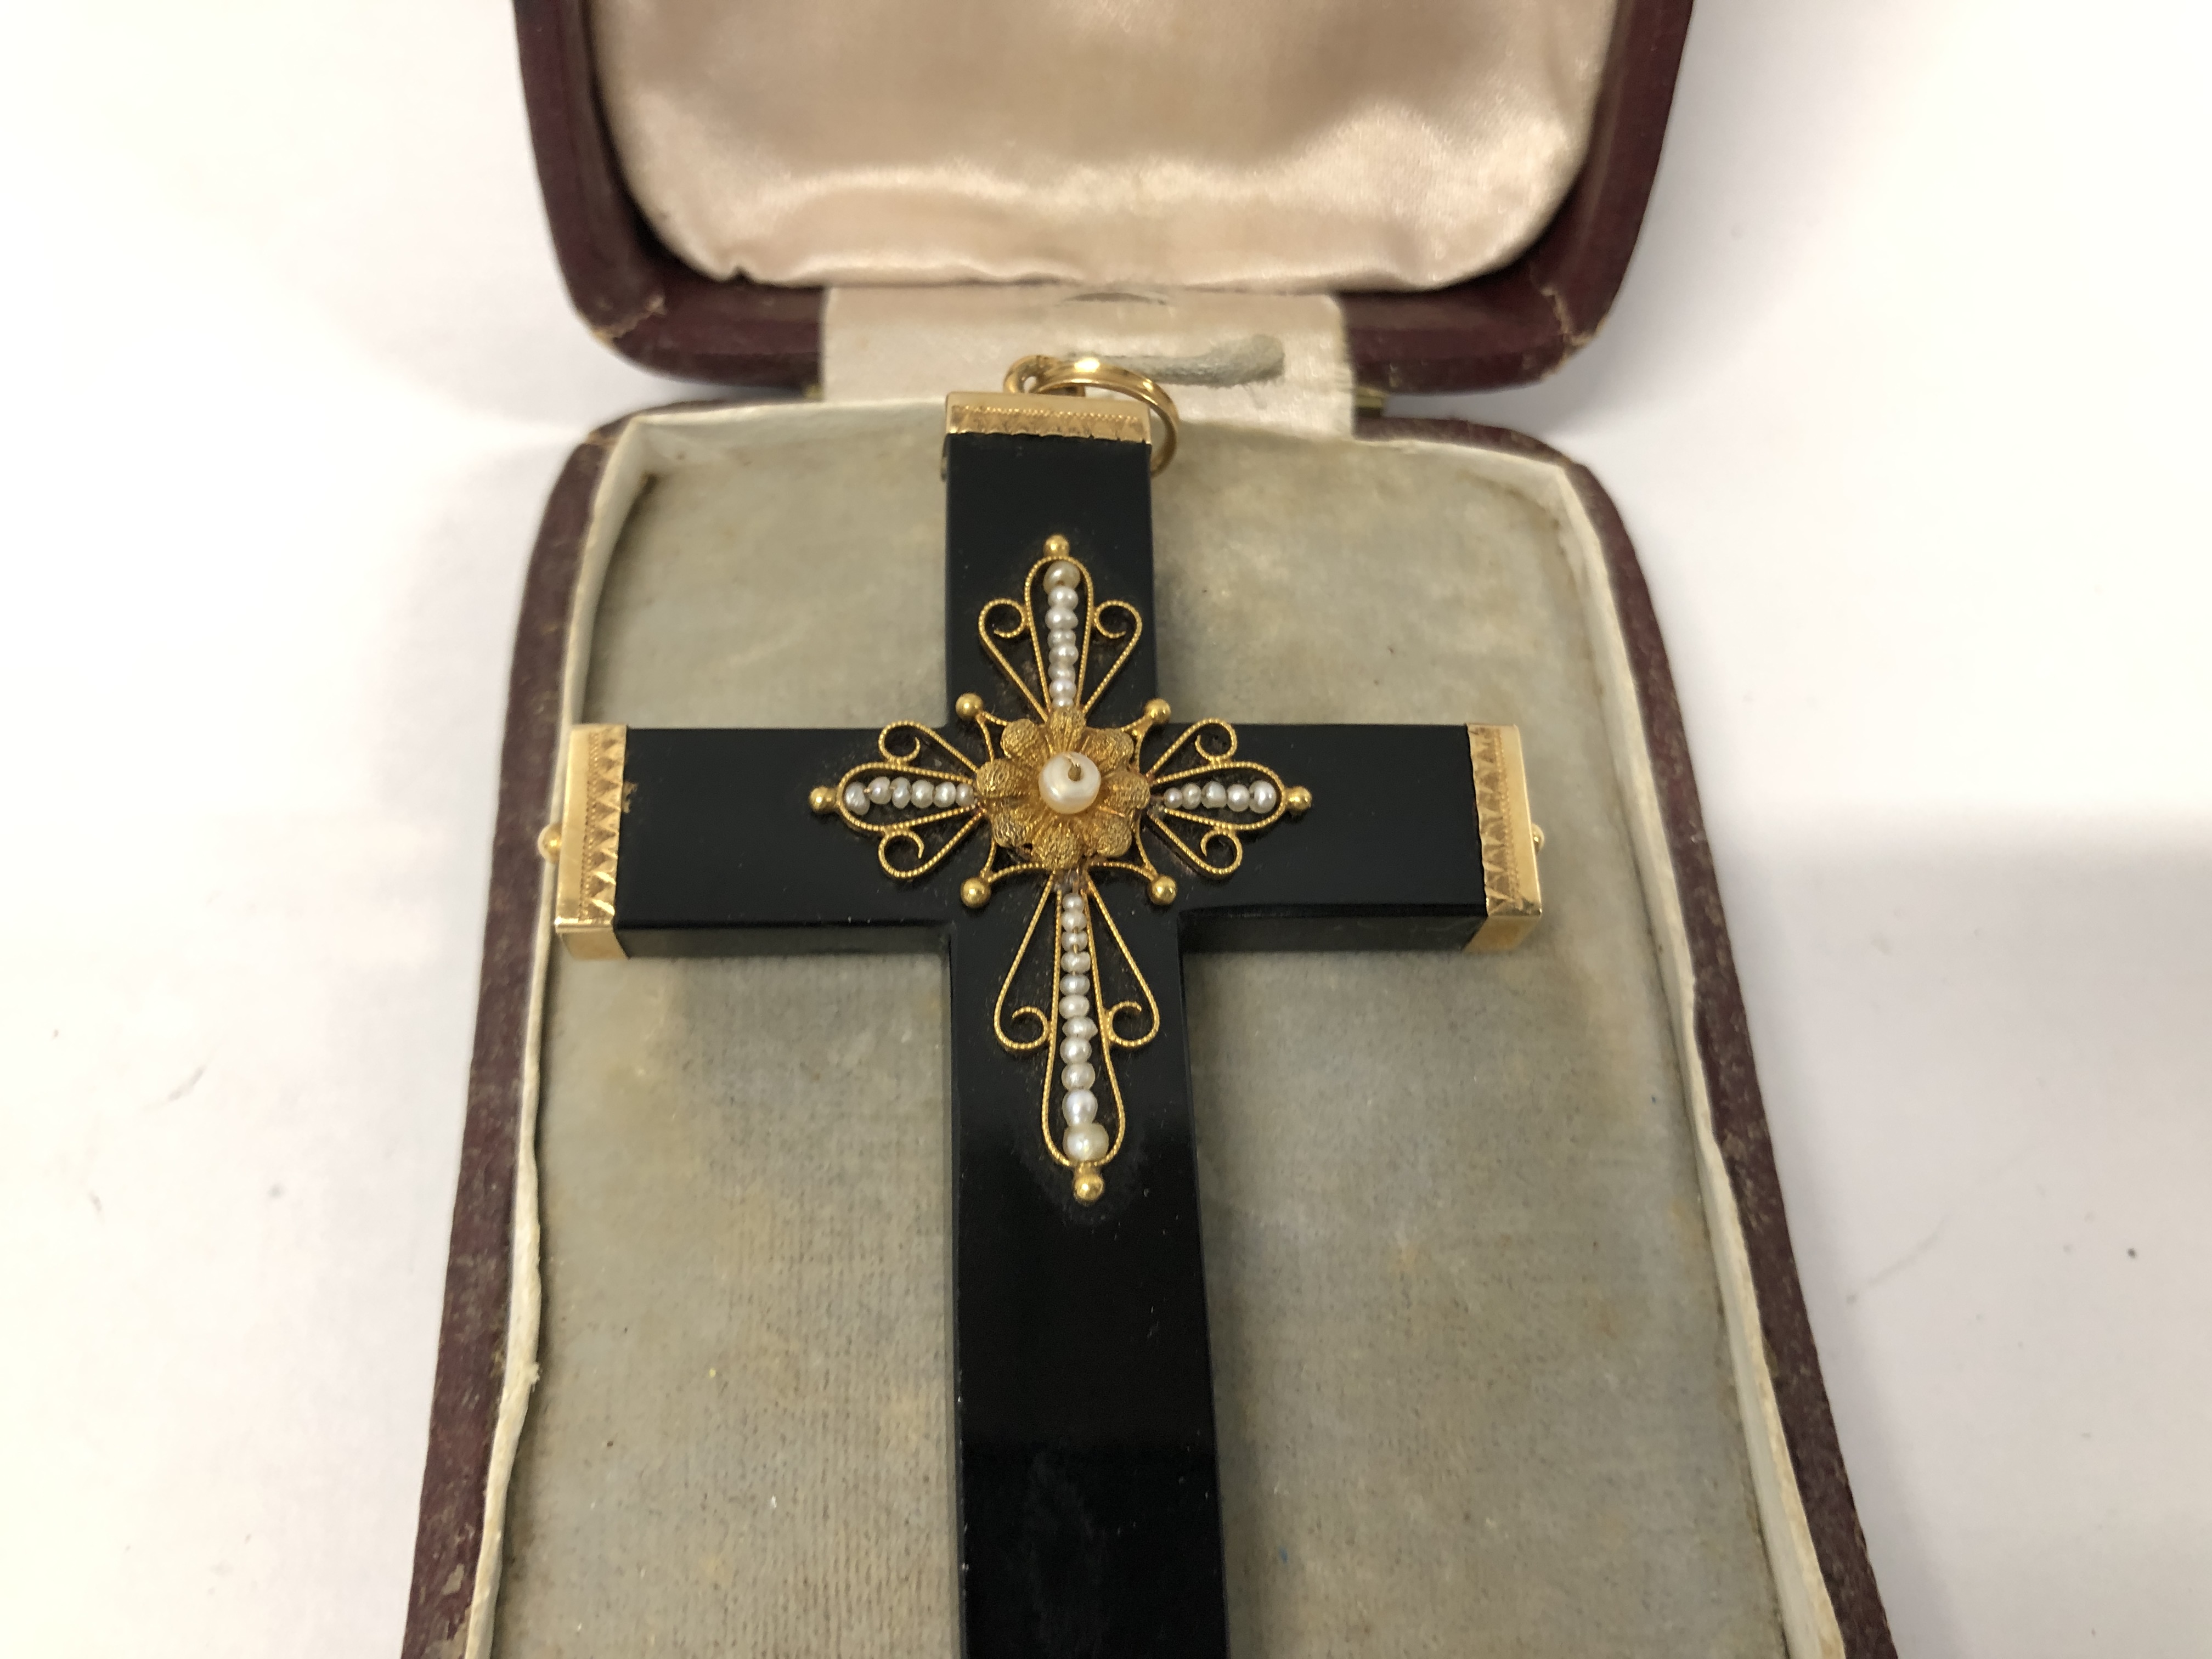 ANTIQUE MOURNING CROSS SET WITH SEED YELLOW METAL CAPPING AND DECORATION IN A VINTAGE BOX - Image 2 of 6